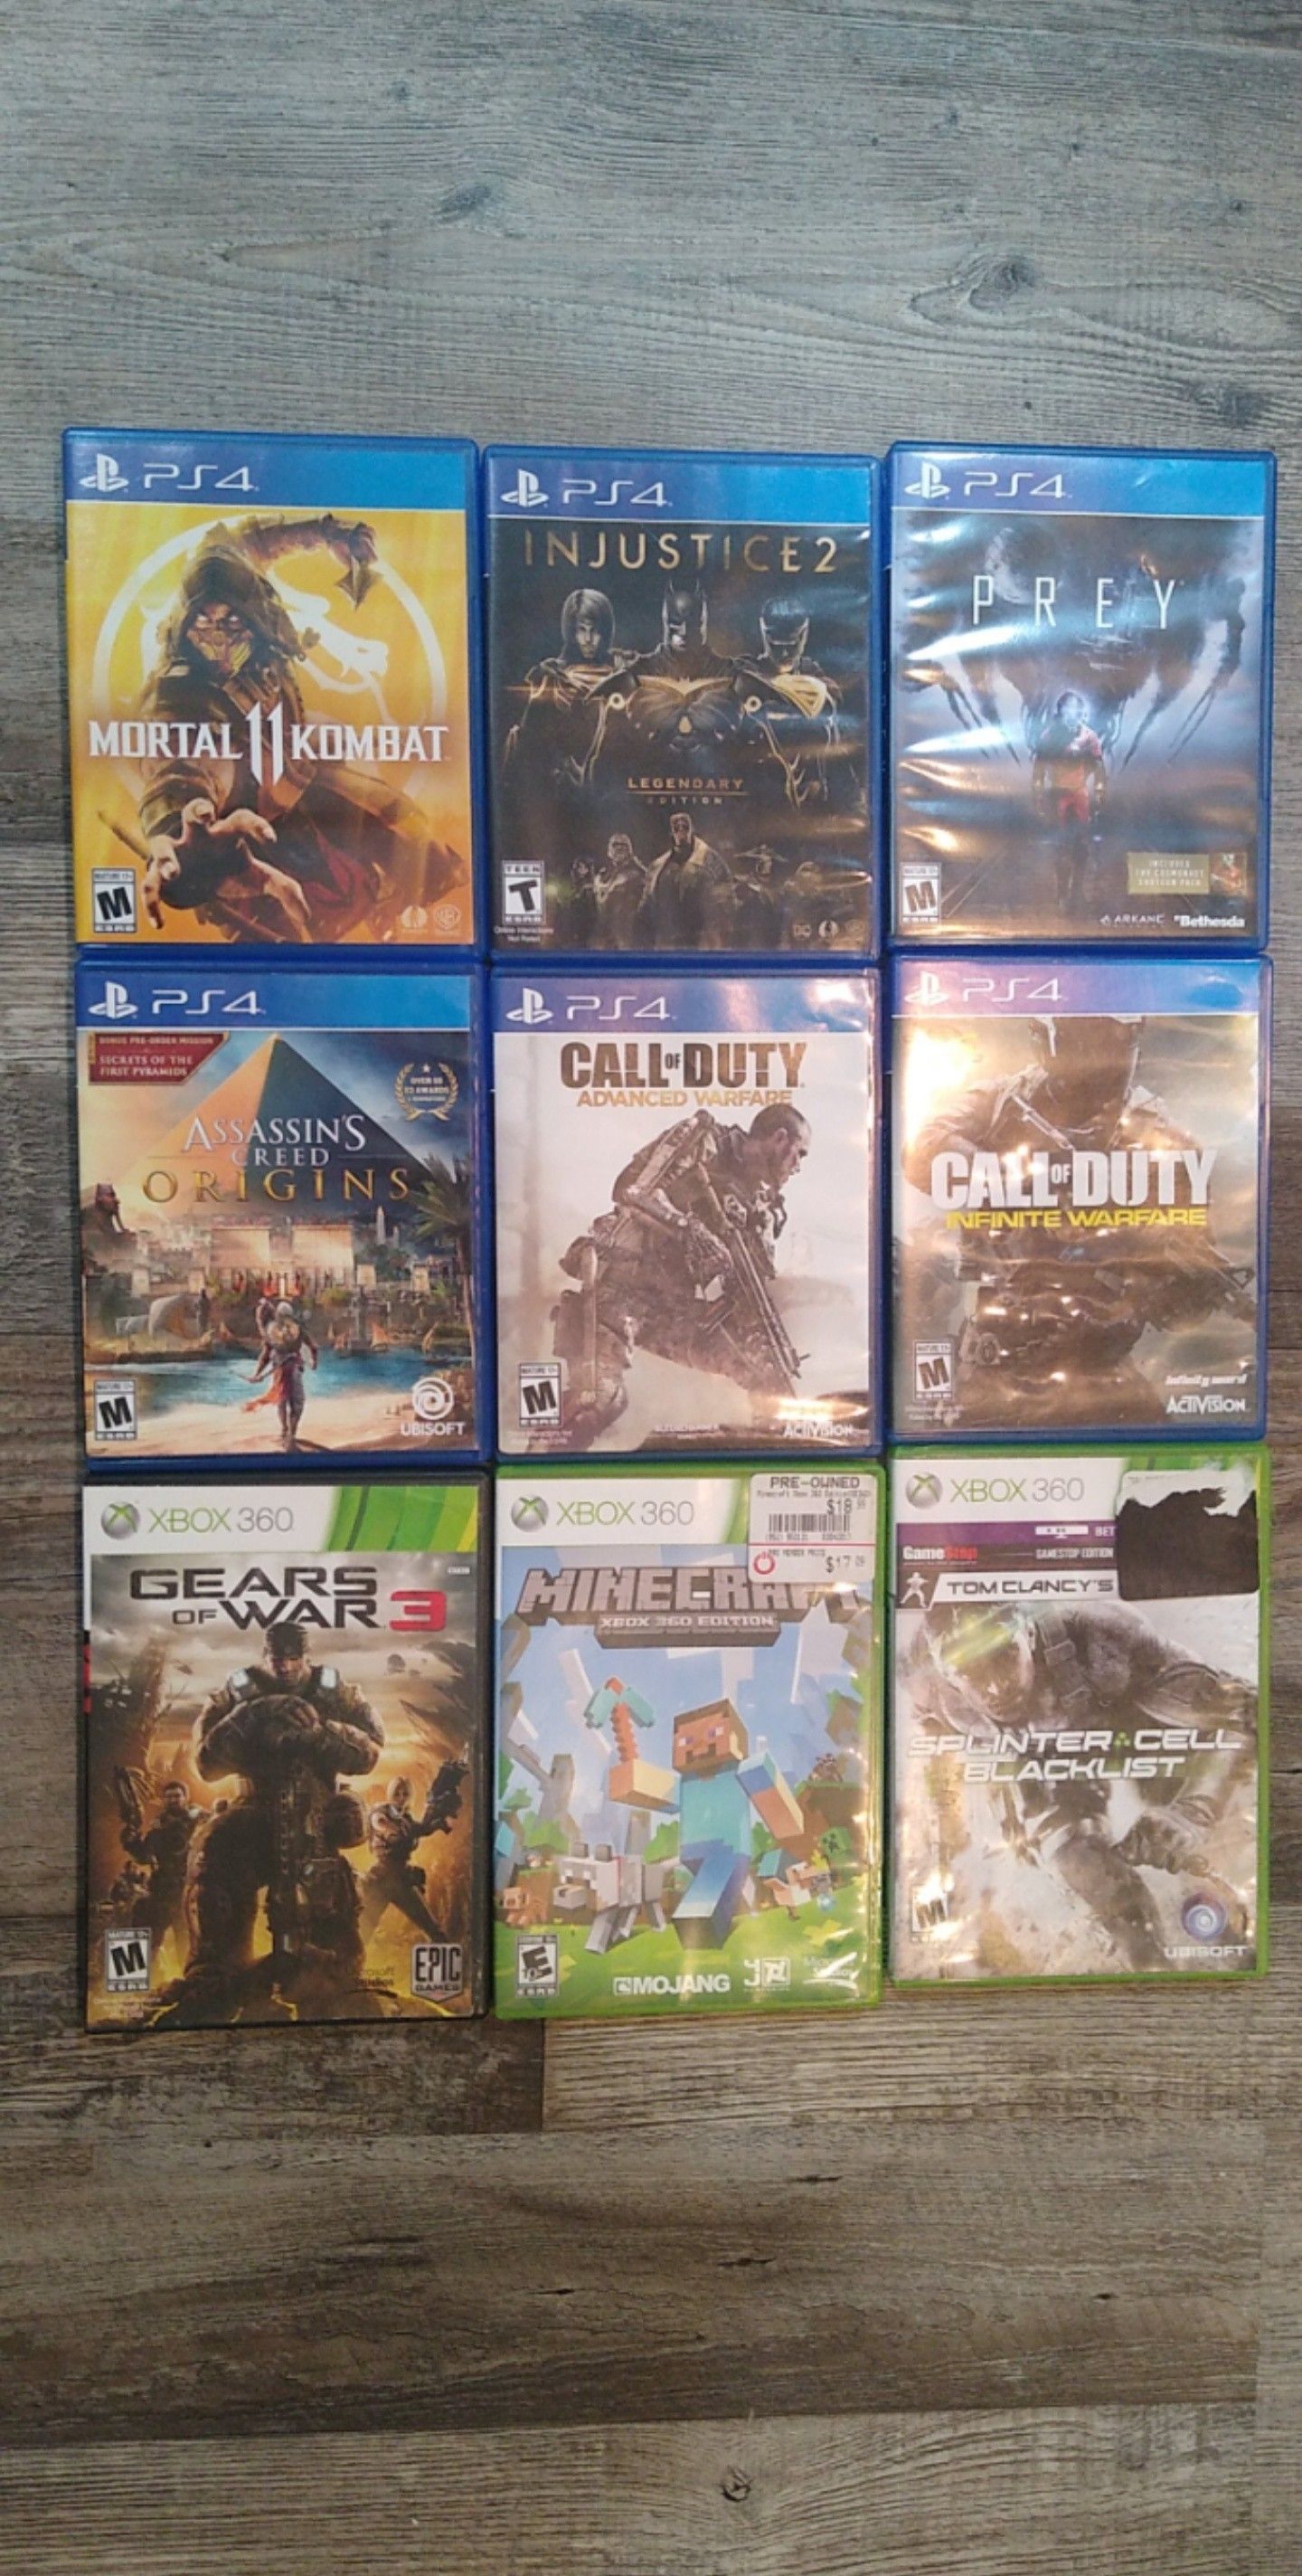 PS4 and Xbox 360 games